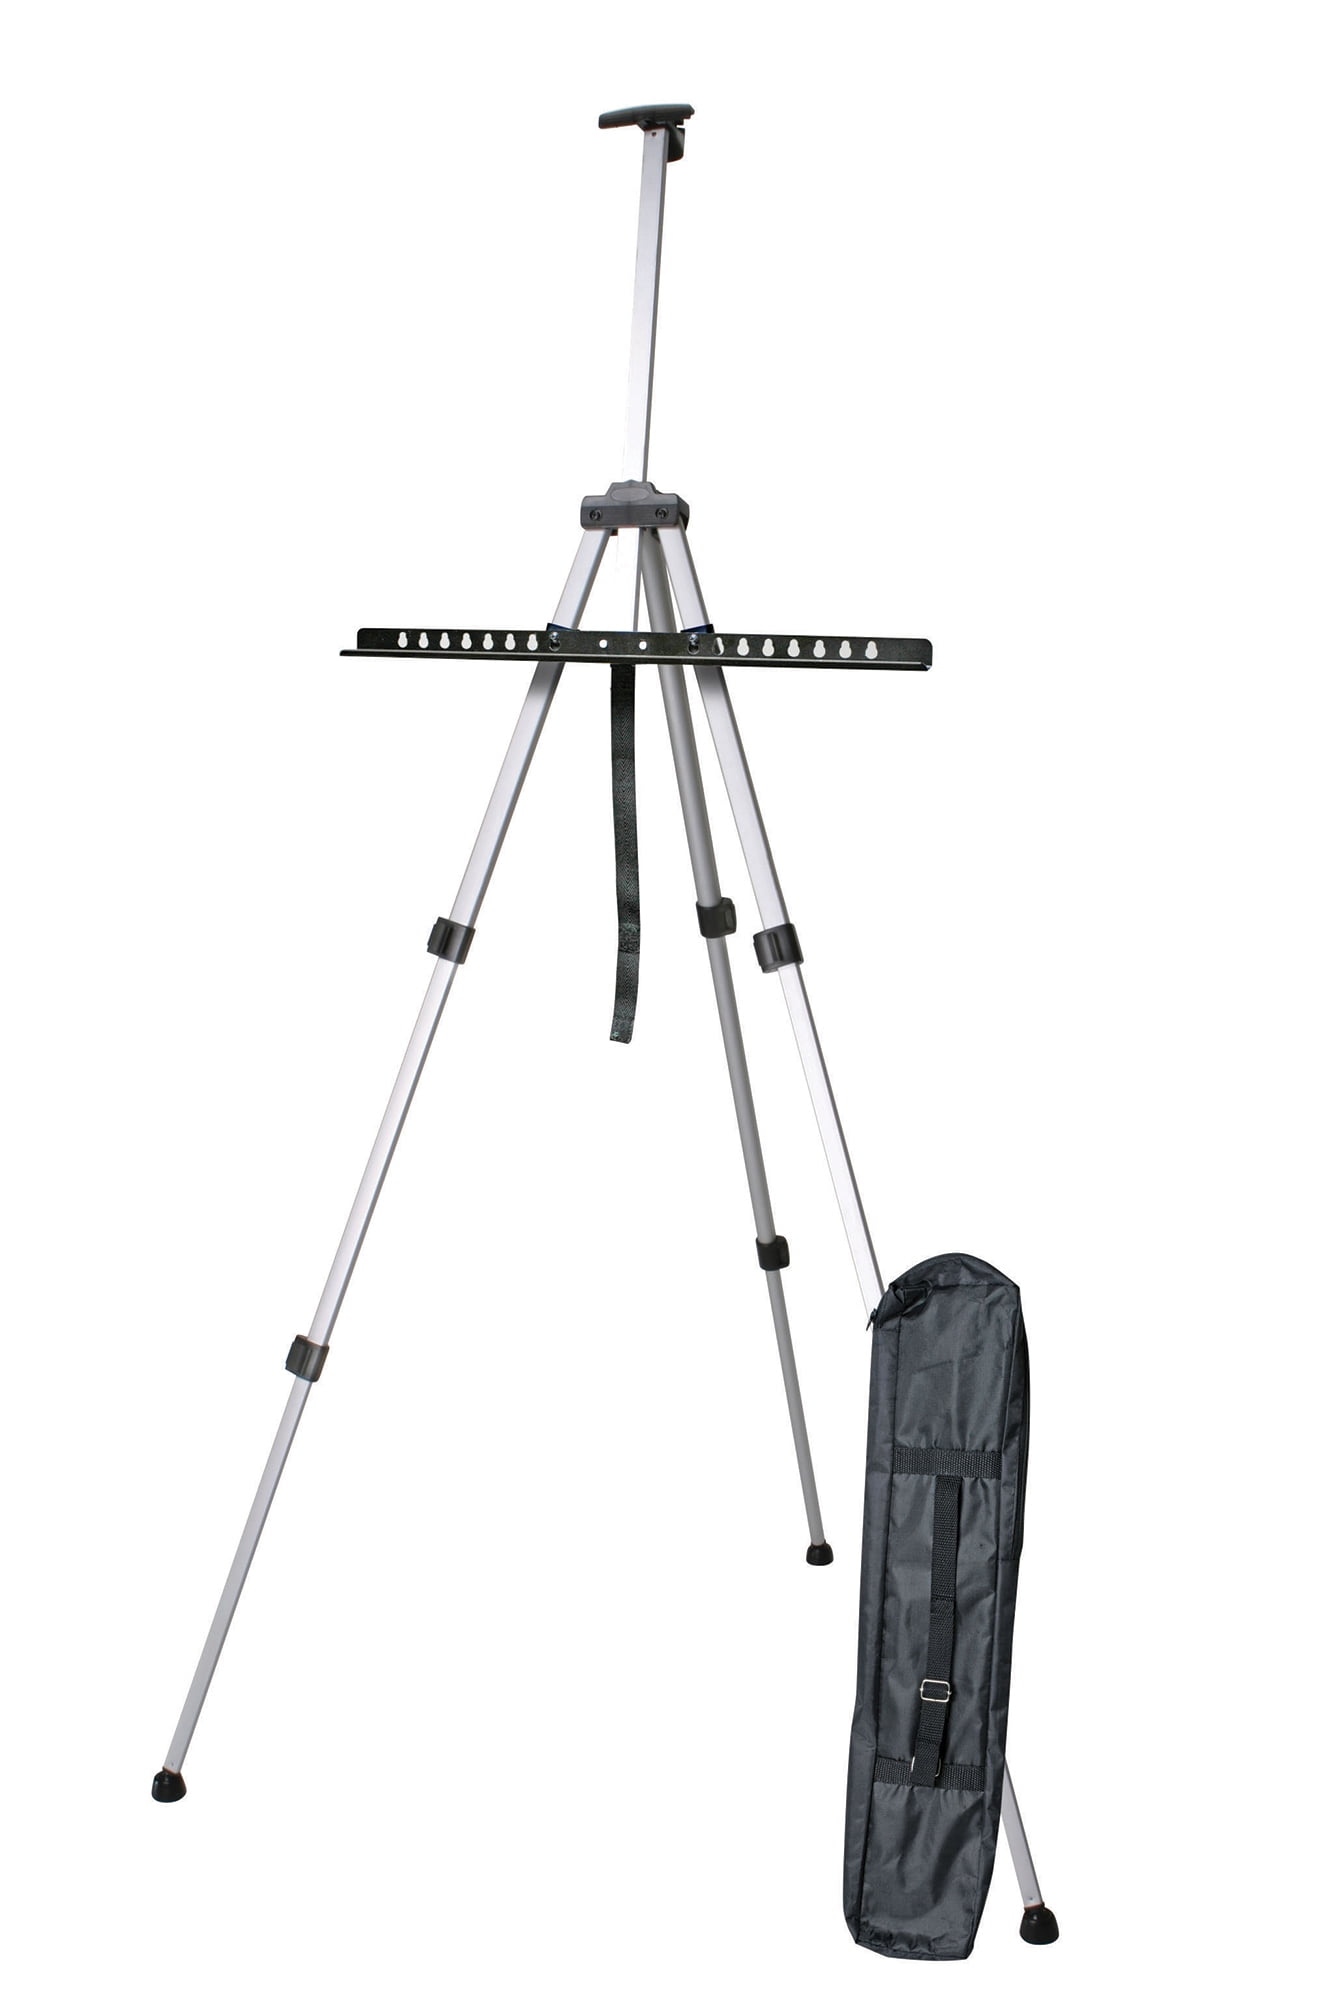 Daler-Rowney Simply Portable Field Easel, Silver, Carry Bag Included, 1 Count